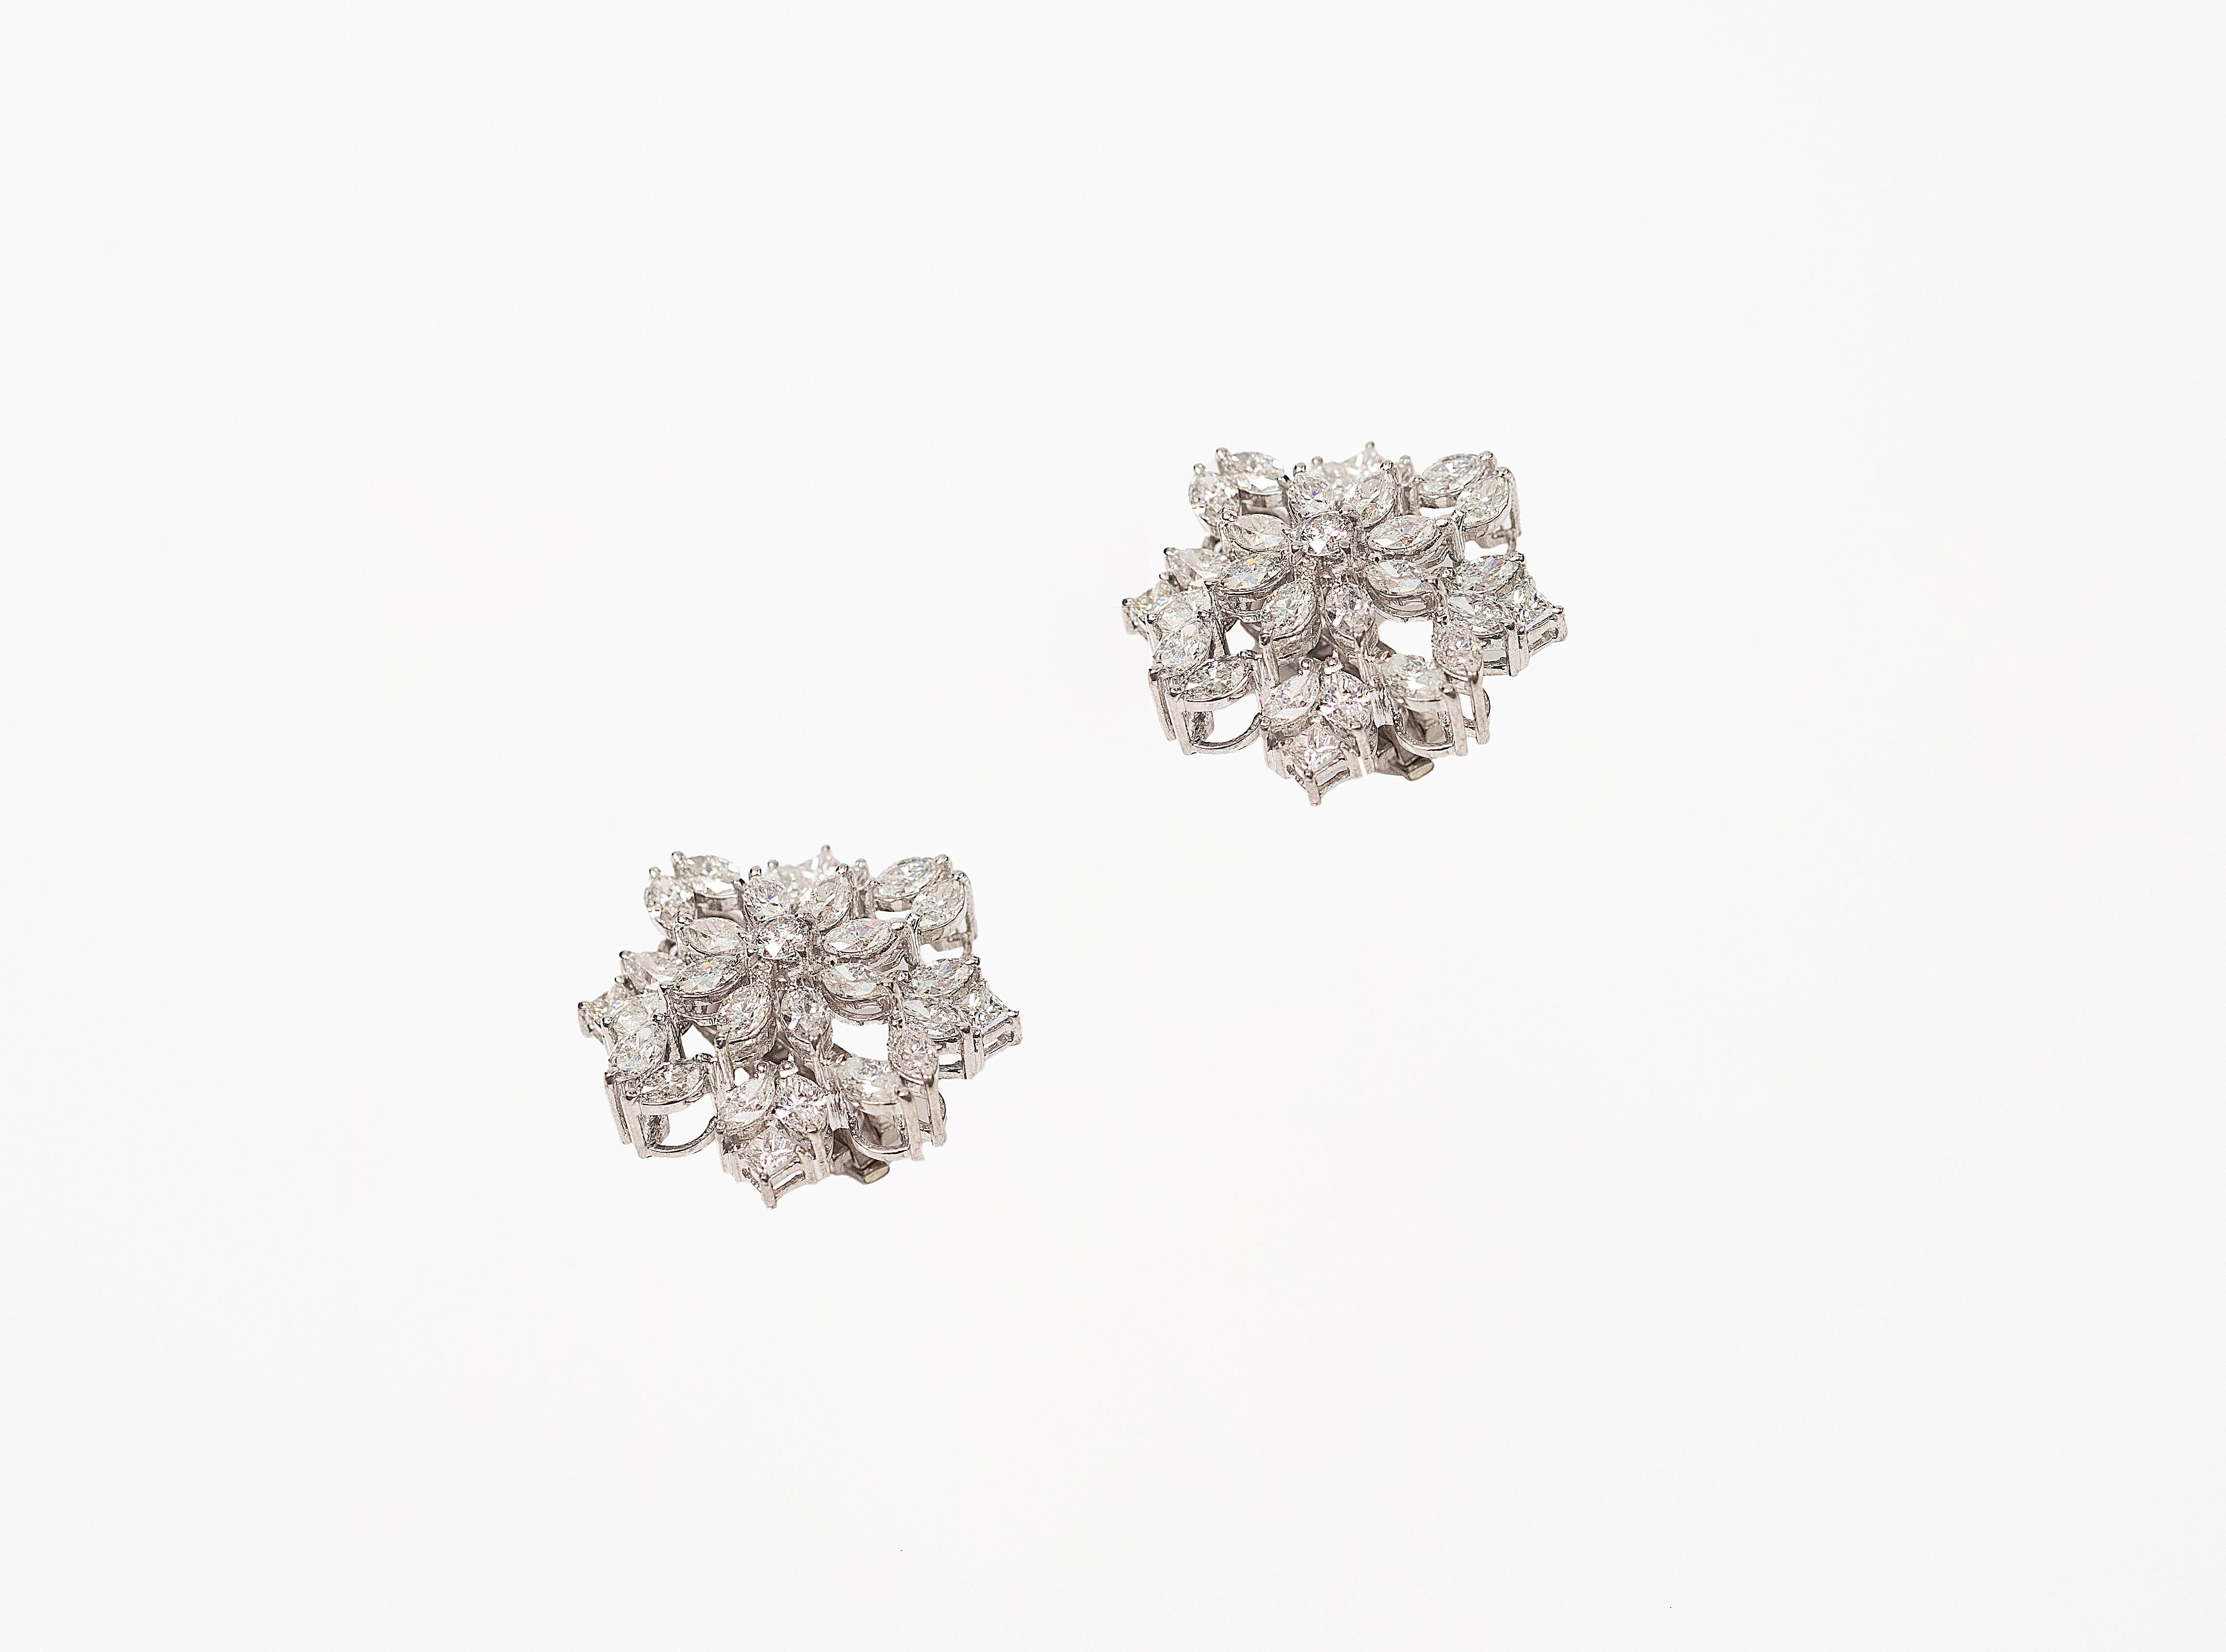 Handcrafted Earring Studs in 18K Gold studded with Marquise and Round Shape Diamonds.
Gold weight - 18.762 gms
Diamond Clarity - VS-Si
Colour - F-G
Post and Clip System